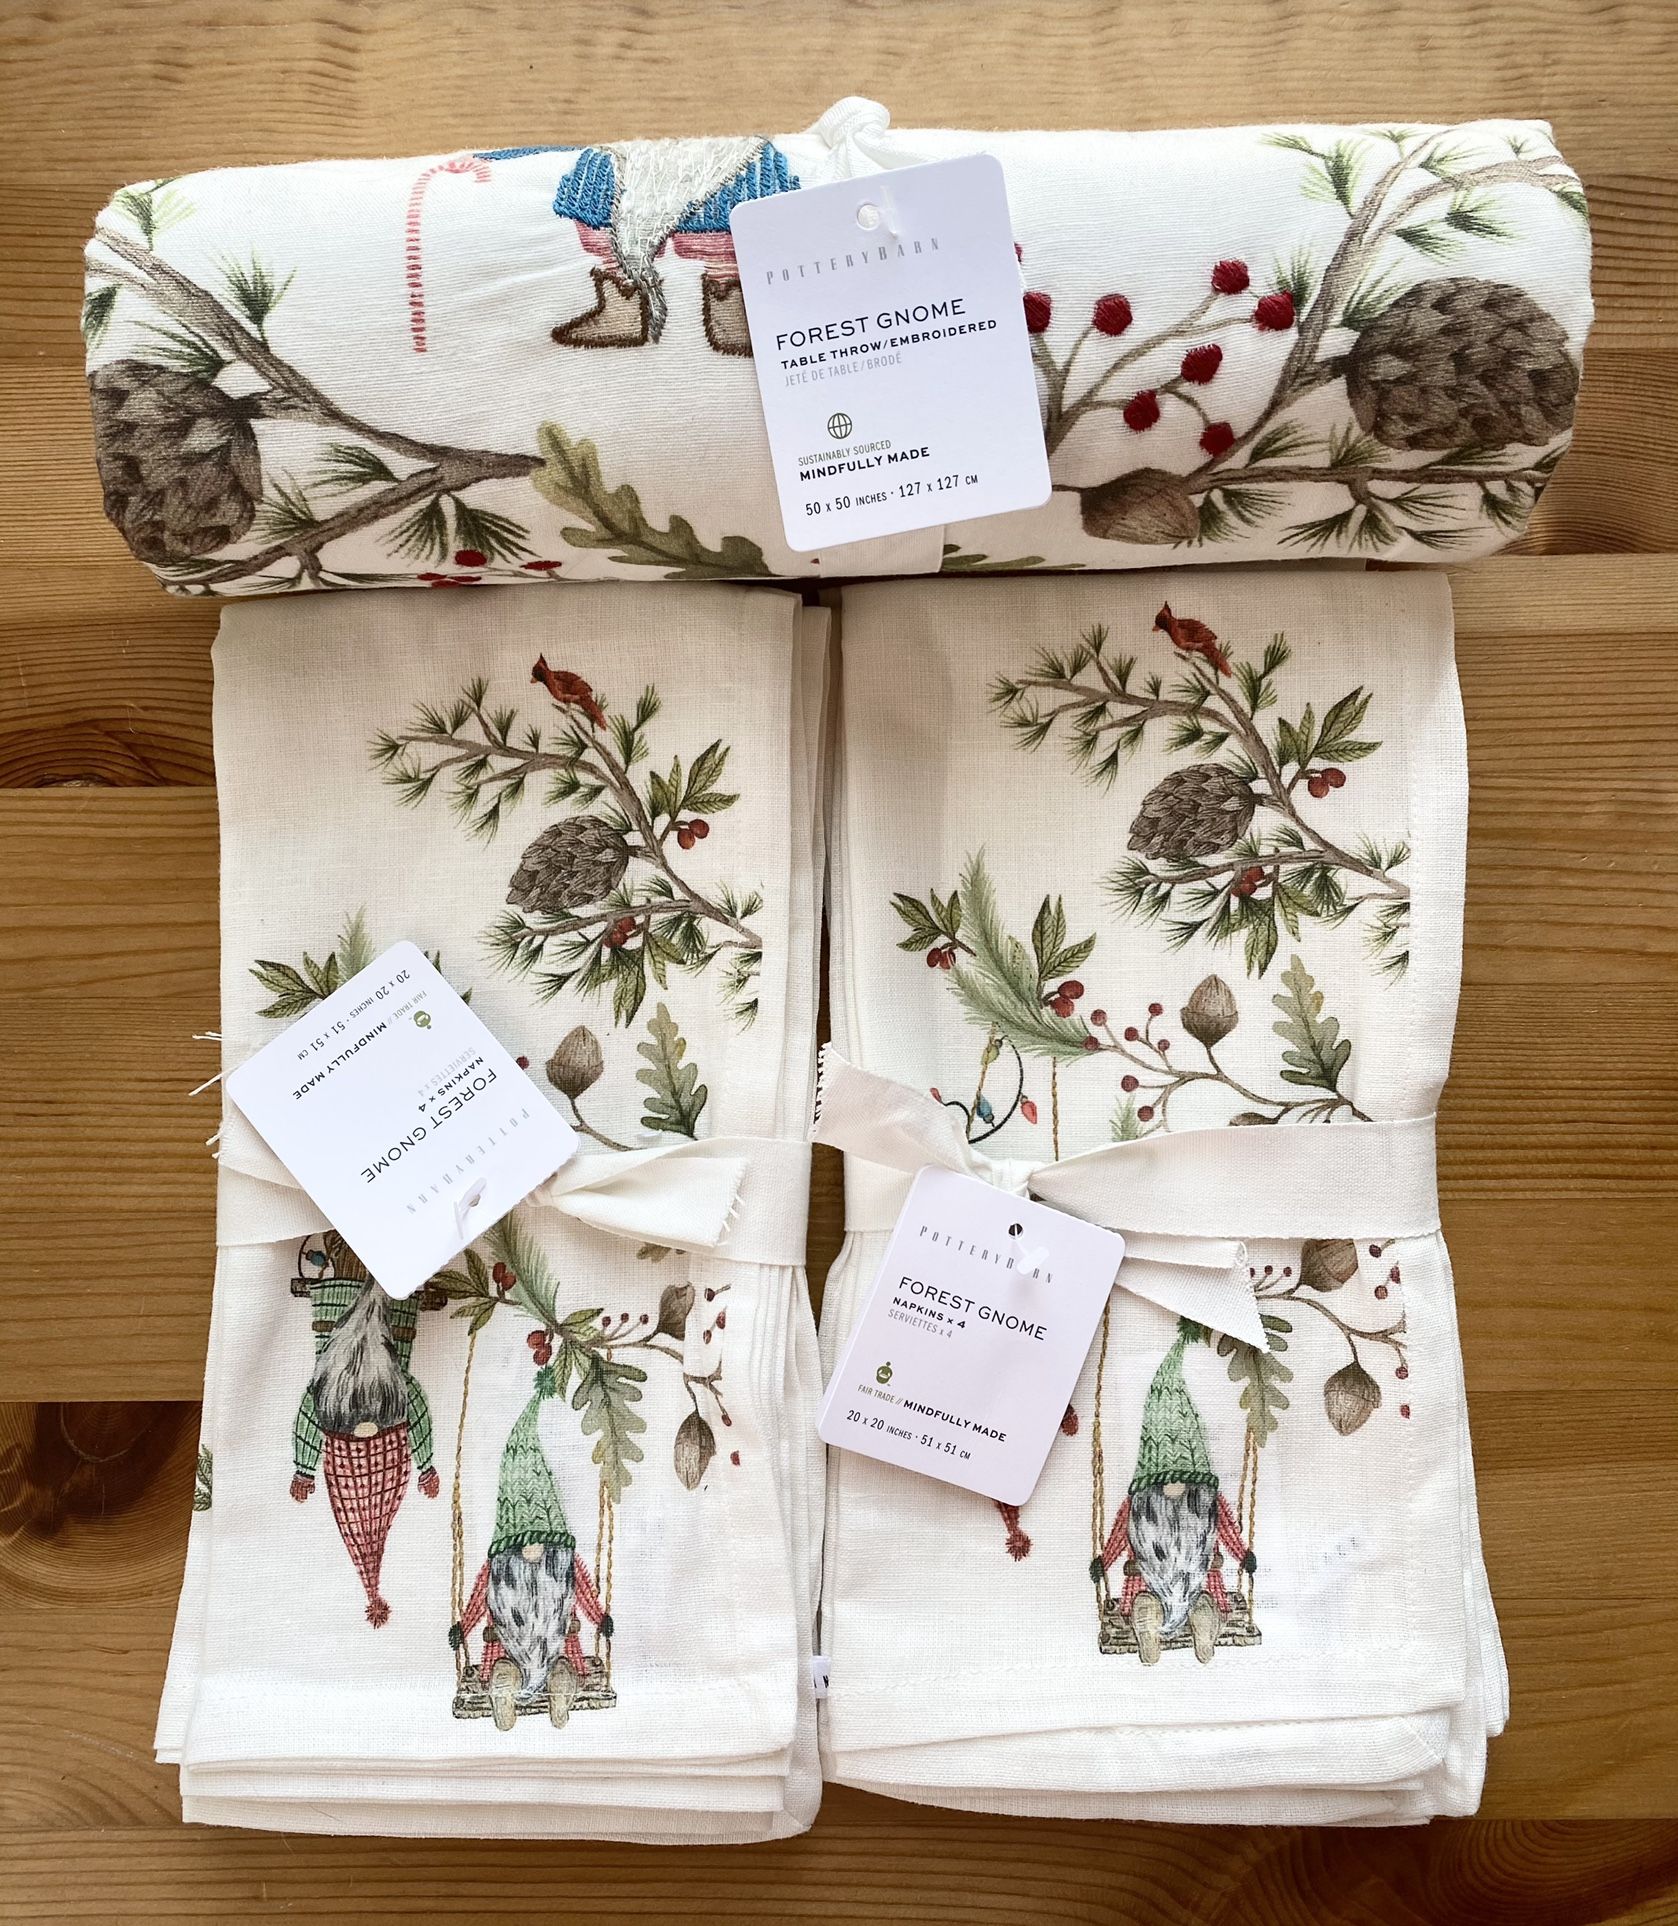 Pottery Barn Forest Gnome Embroidered Cotton/Linen Table Throw and 8 Napkins - NWT Retail $209